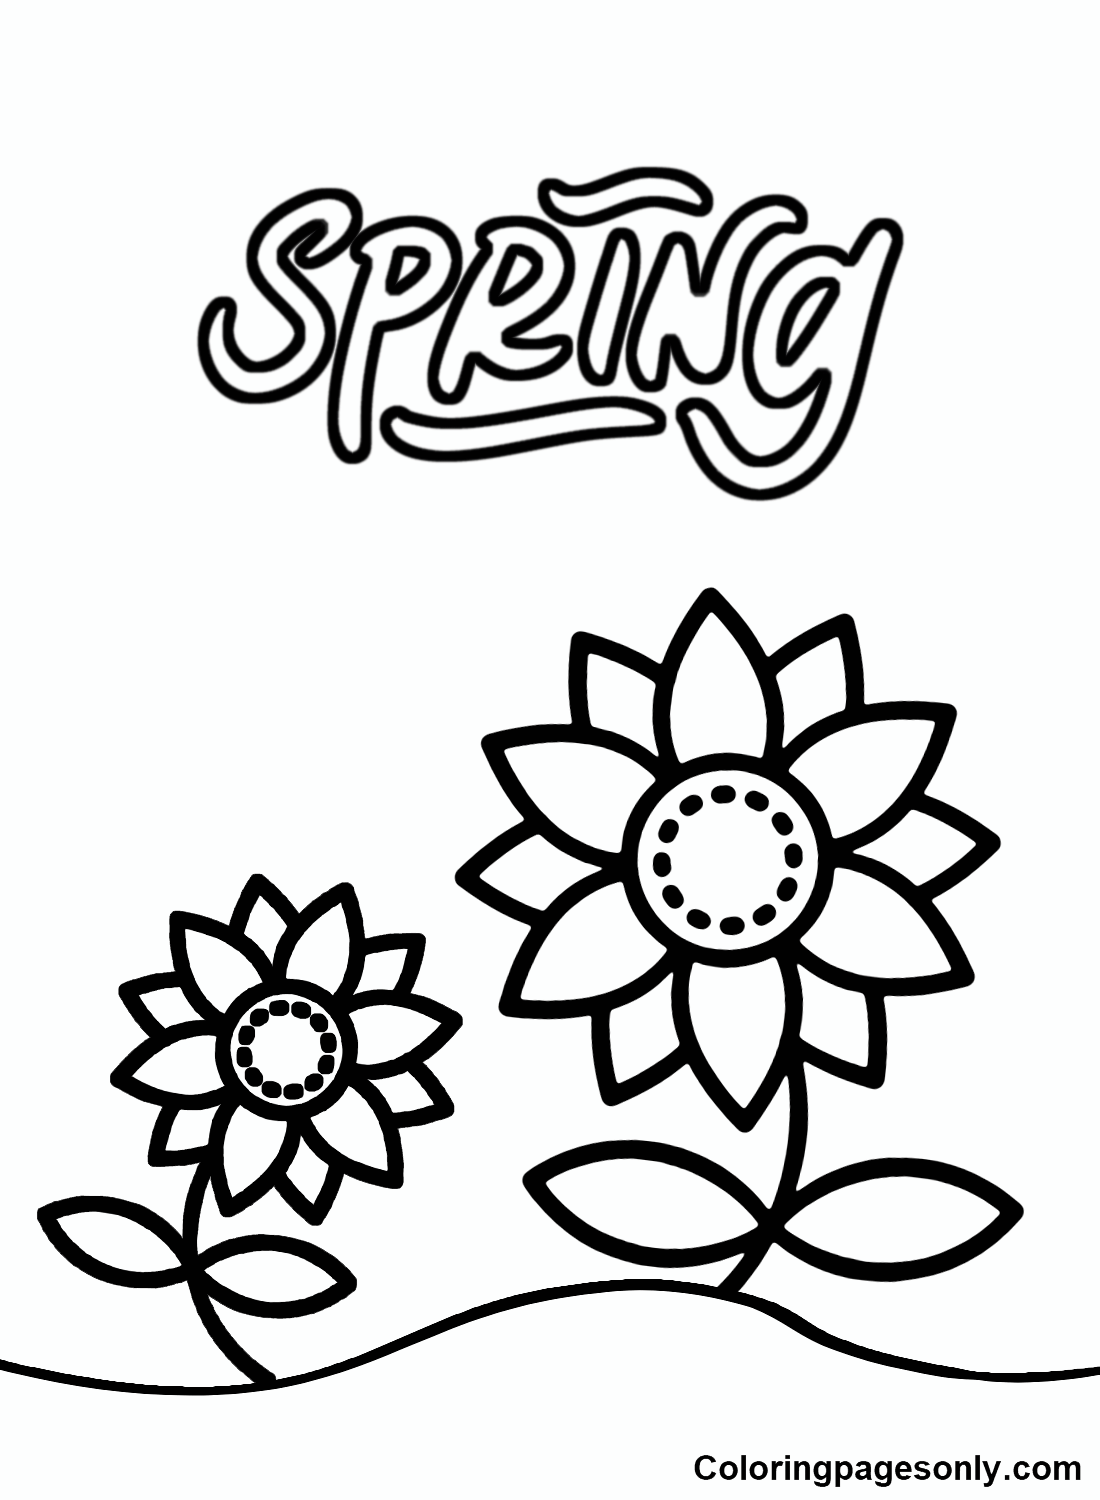 First day of spring coloring pages printable for free download